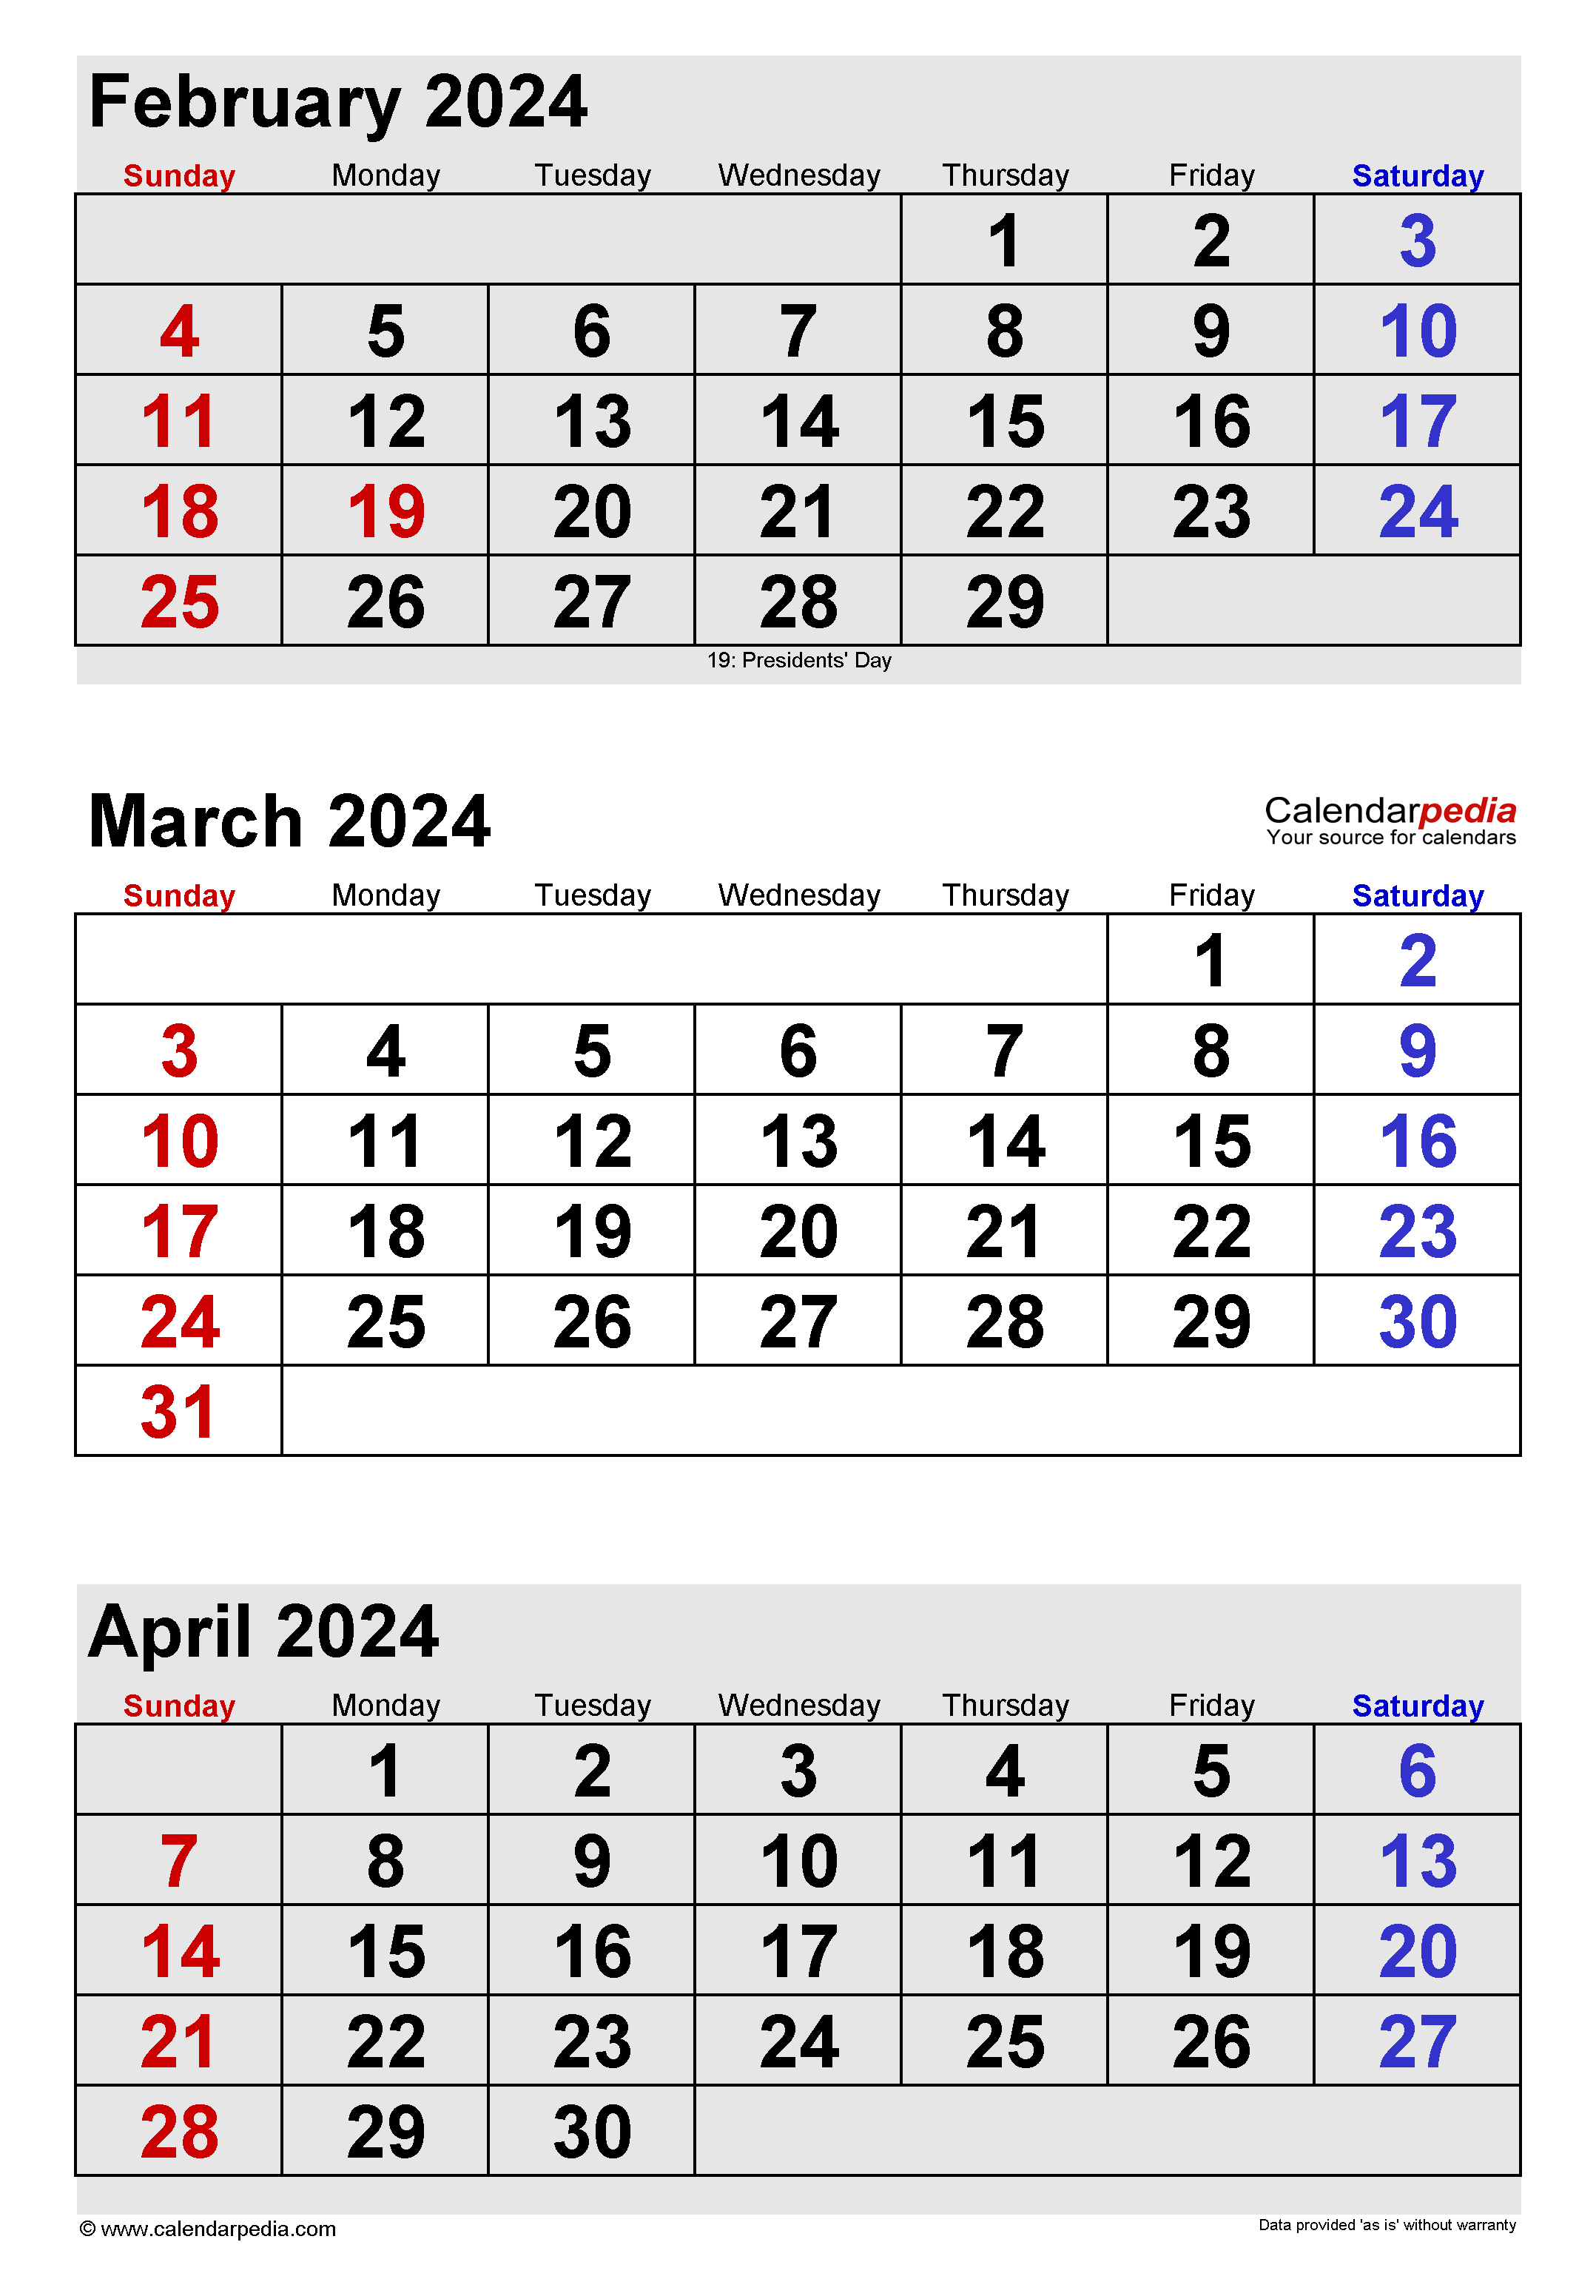 March 2024 Calendar | Templates For Word, Excel And Pdf intended for Feb March April 2024 Calendar Printable